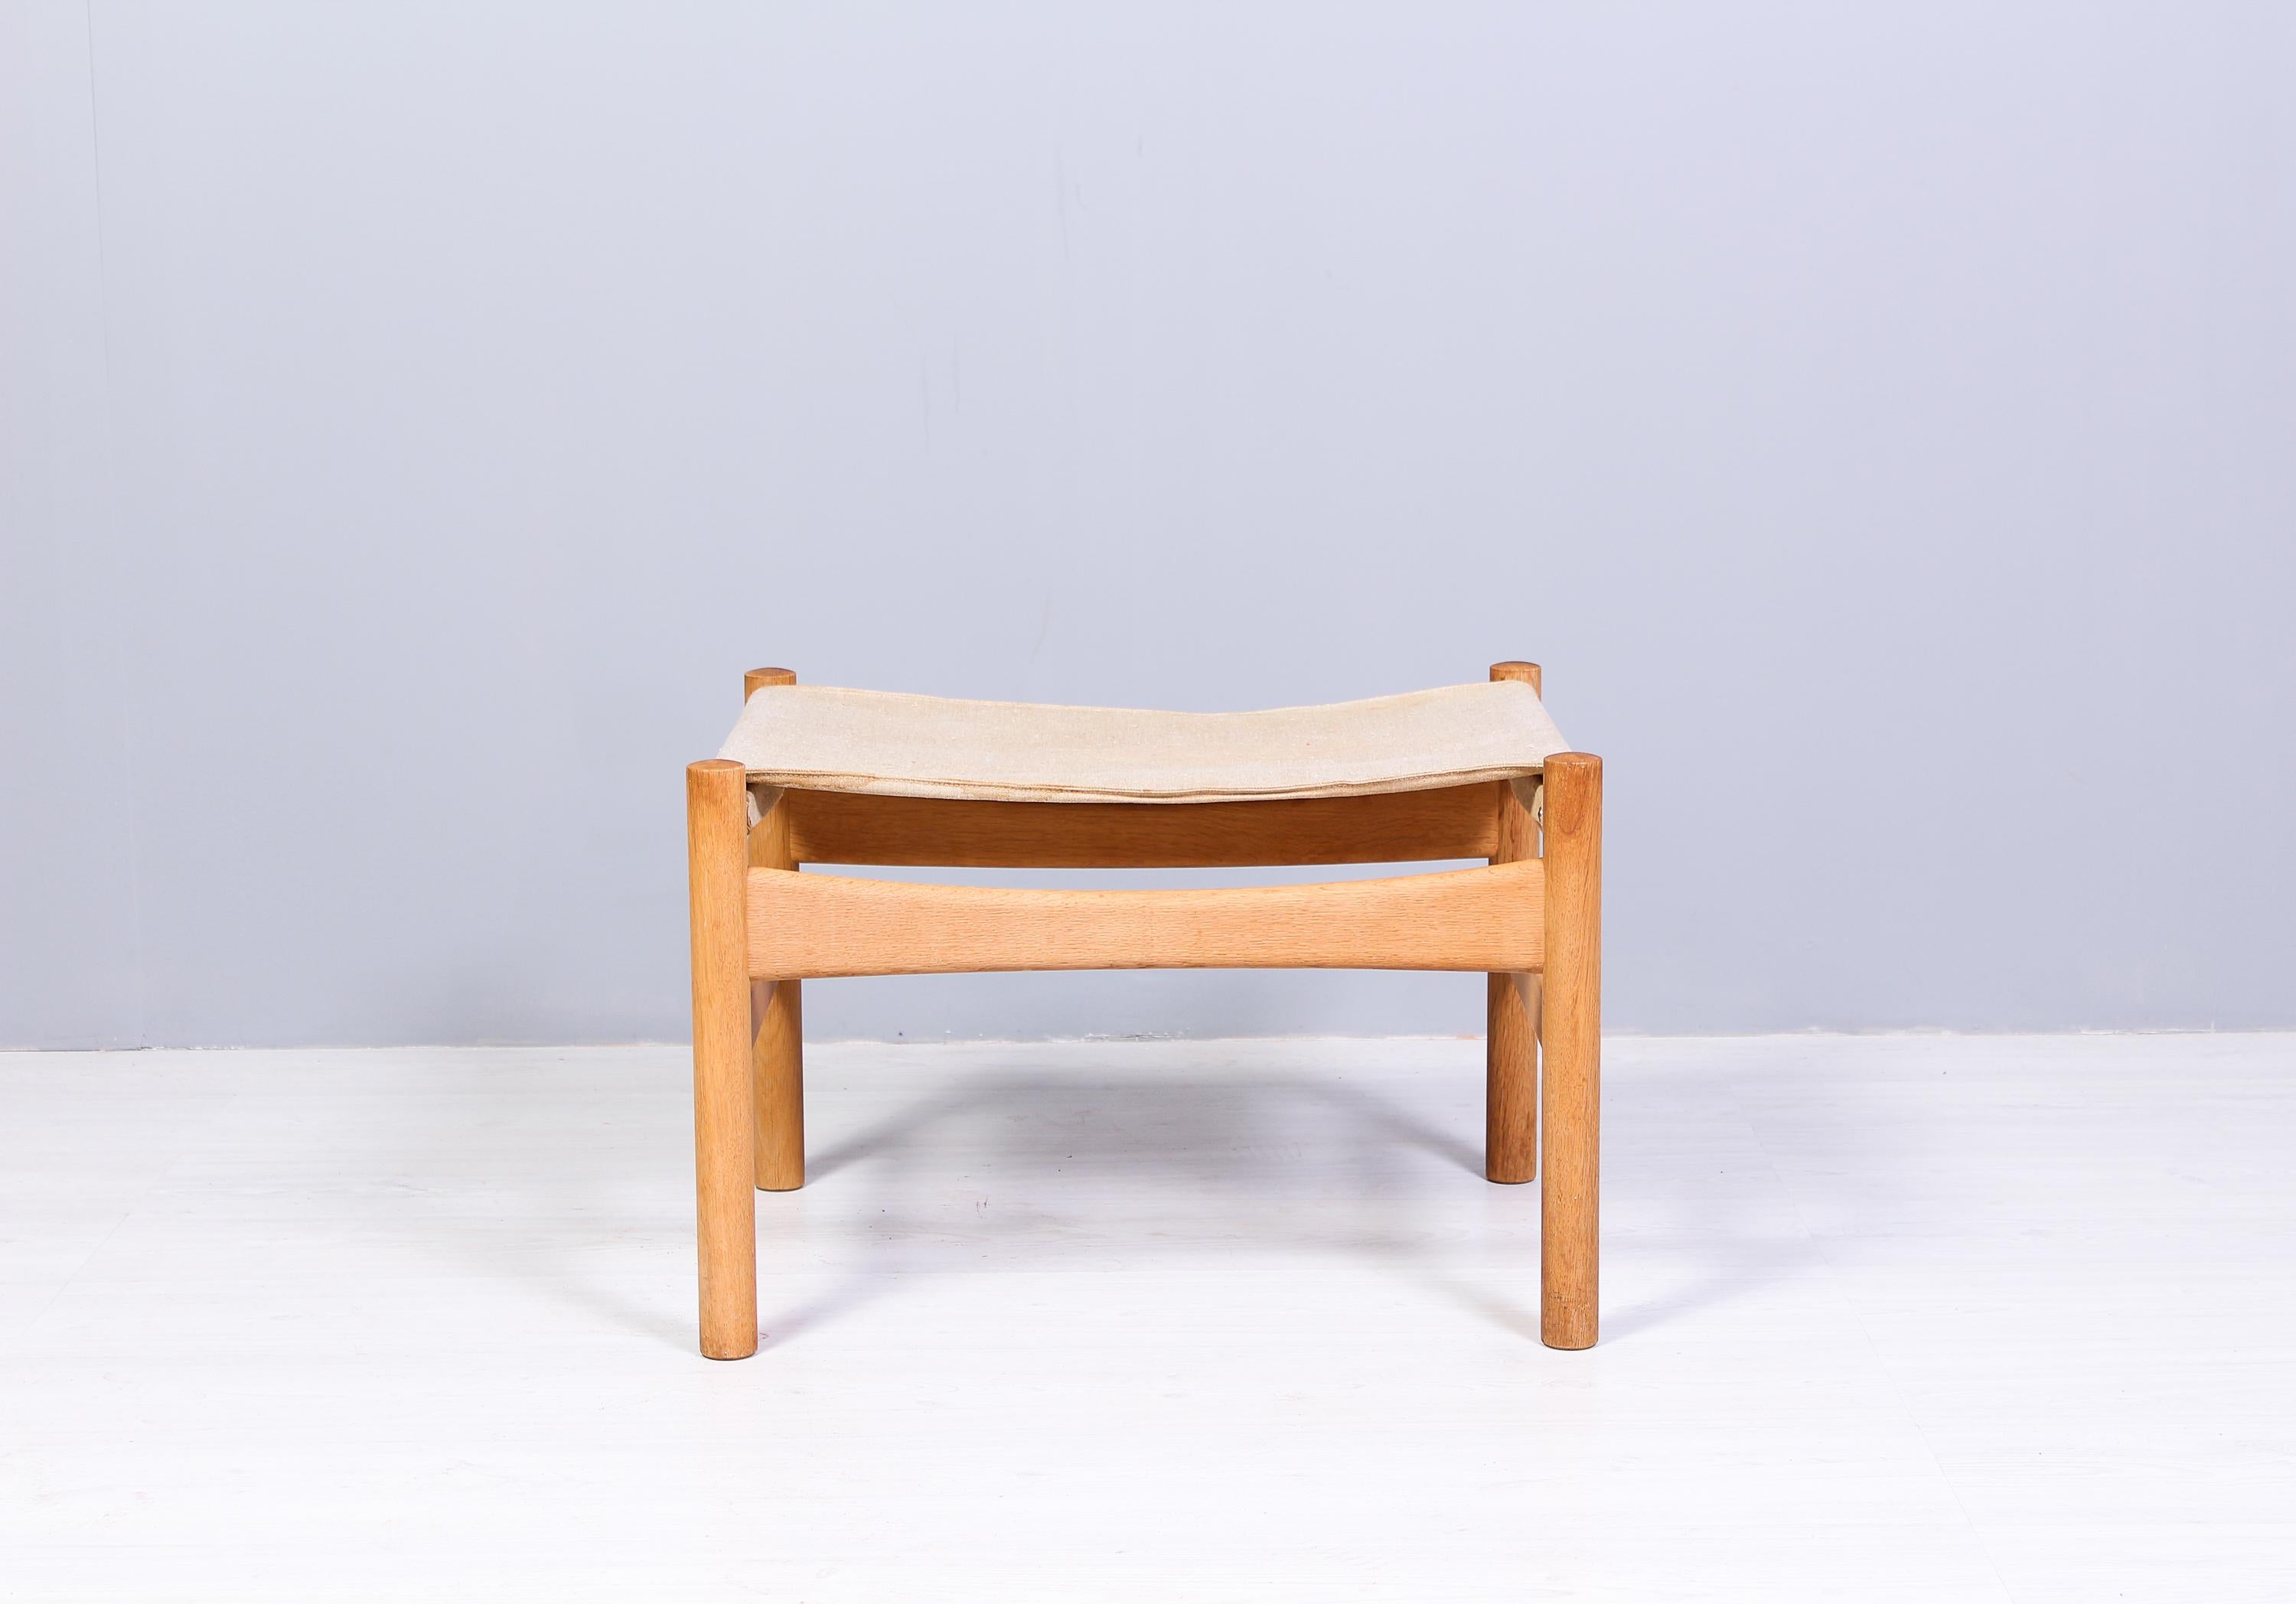 This oak stool is designed by Børge Mogensen and produced by Fredericia Stolefabrik in Denmark in the 1960s. The frame is made out of solid oak with a canvas upholstery. The frame is in good condition with signs of usage and patinas, the canvas have